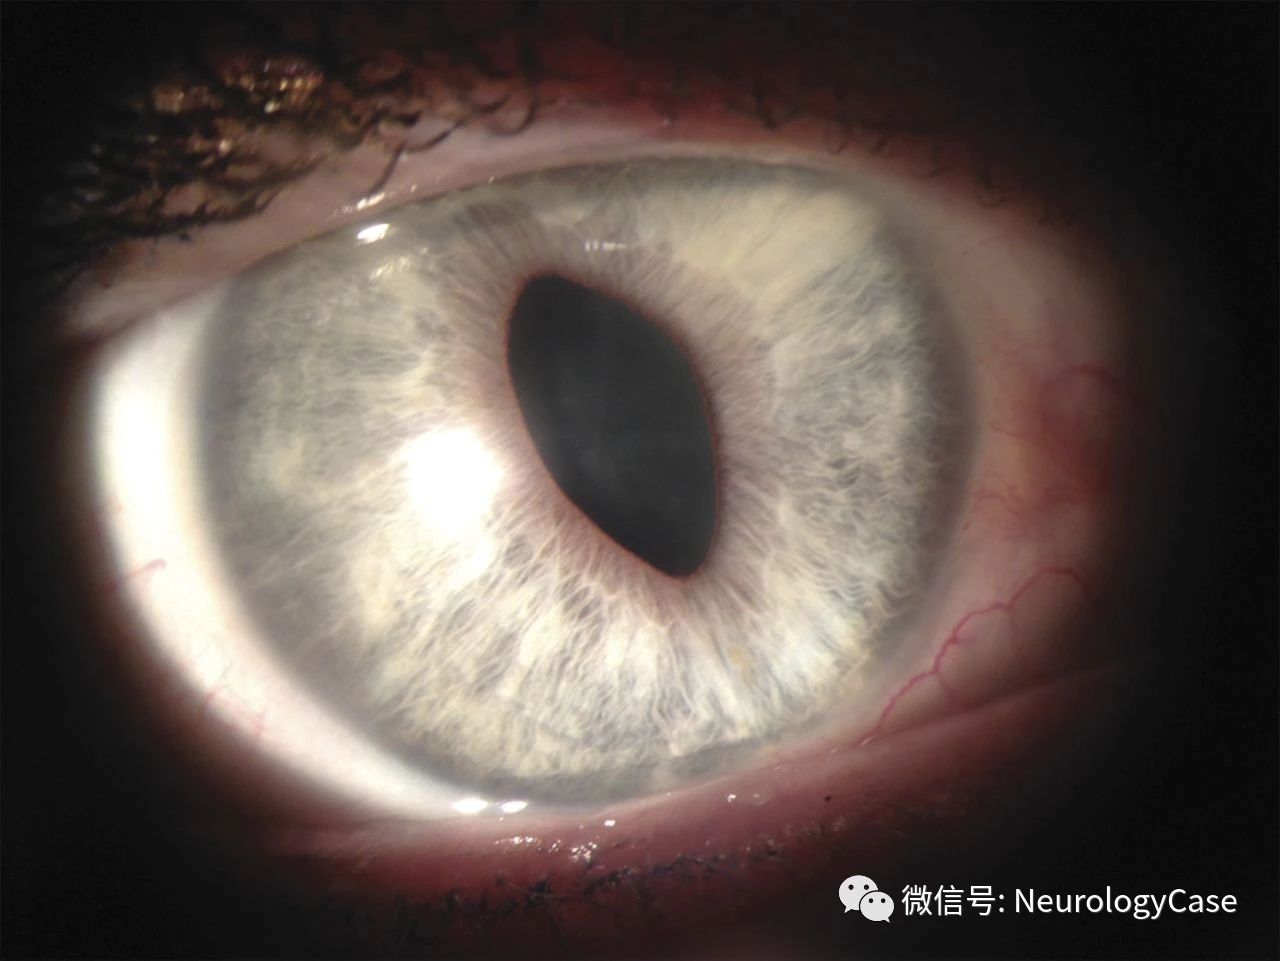 Neurology：不寻常的Adie<font color="red">样</font>瞳孔：猫眼瞳孔